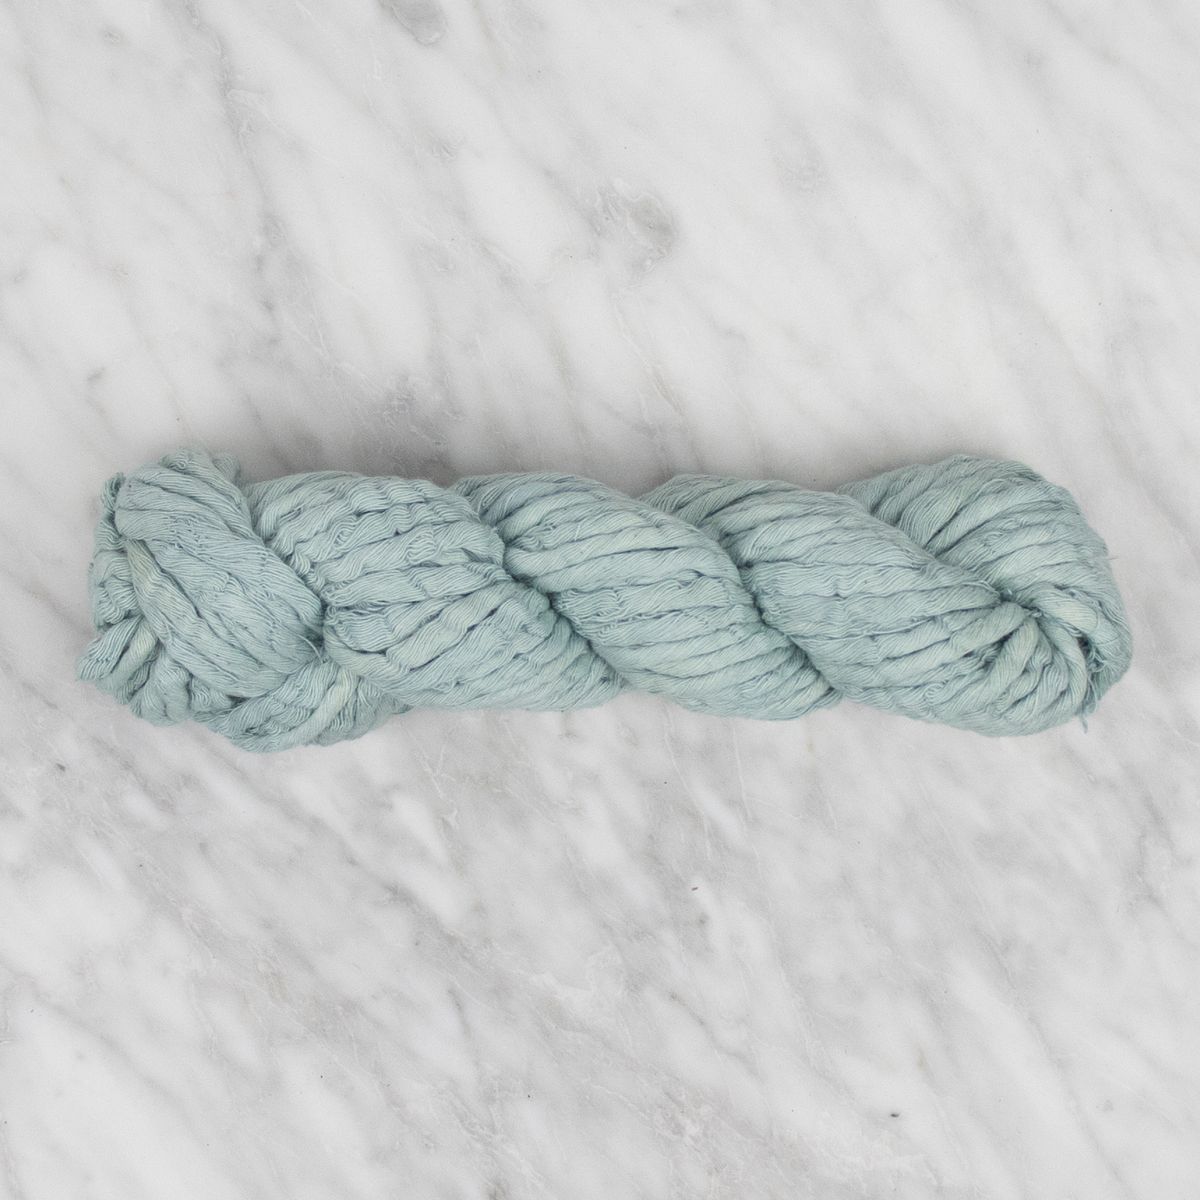 5mm Hand-Dyed Cotton String - Sky - 100 grams